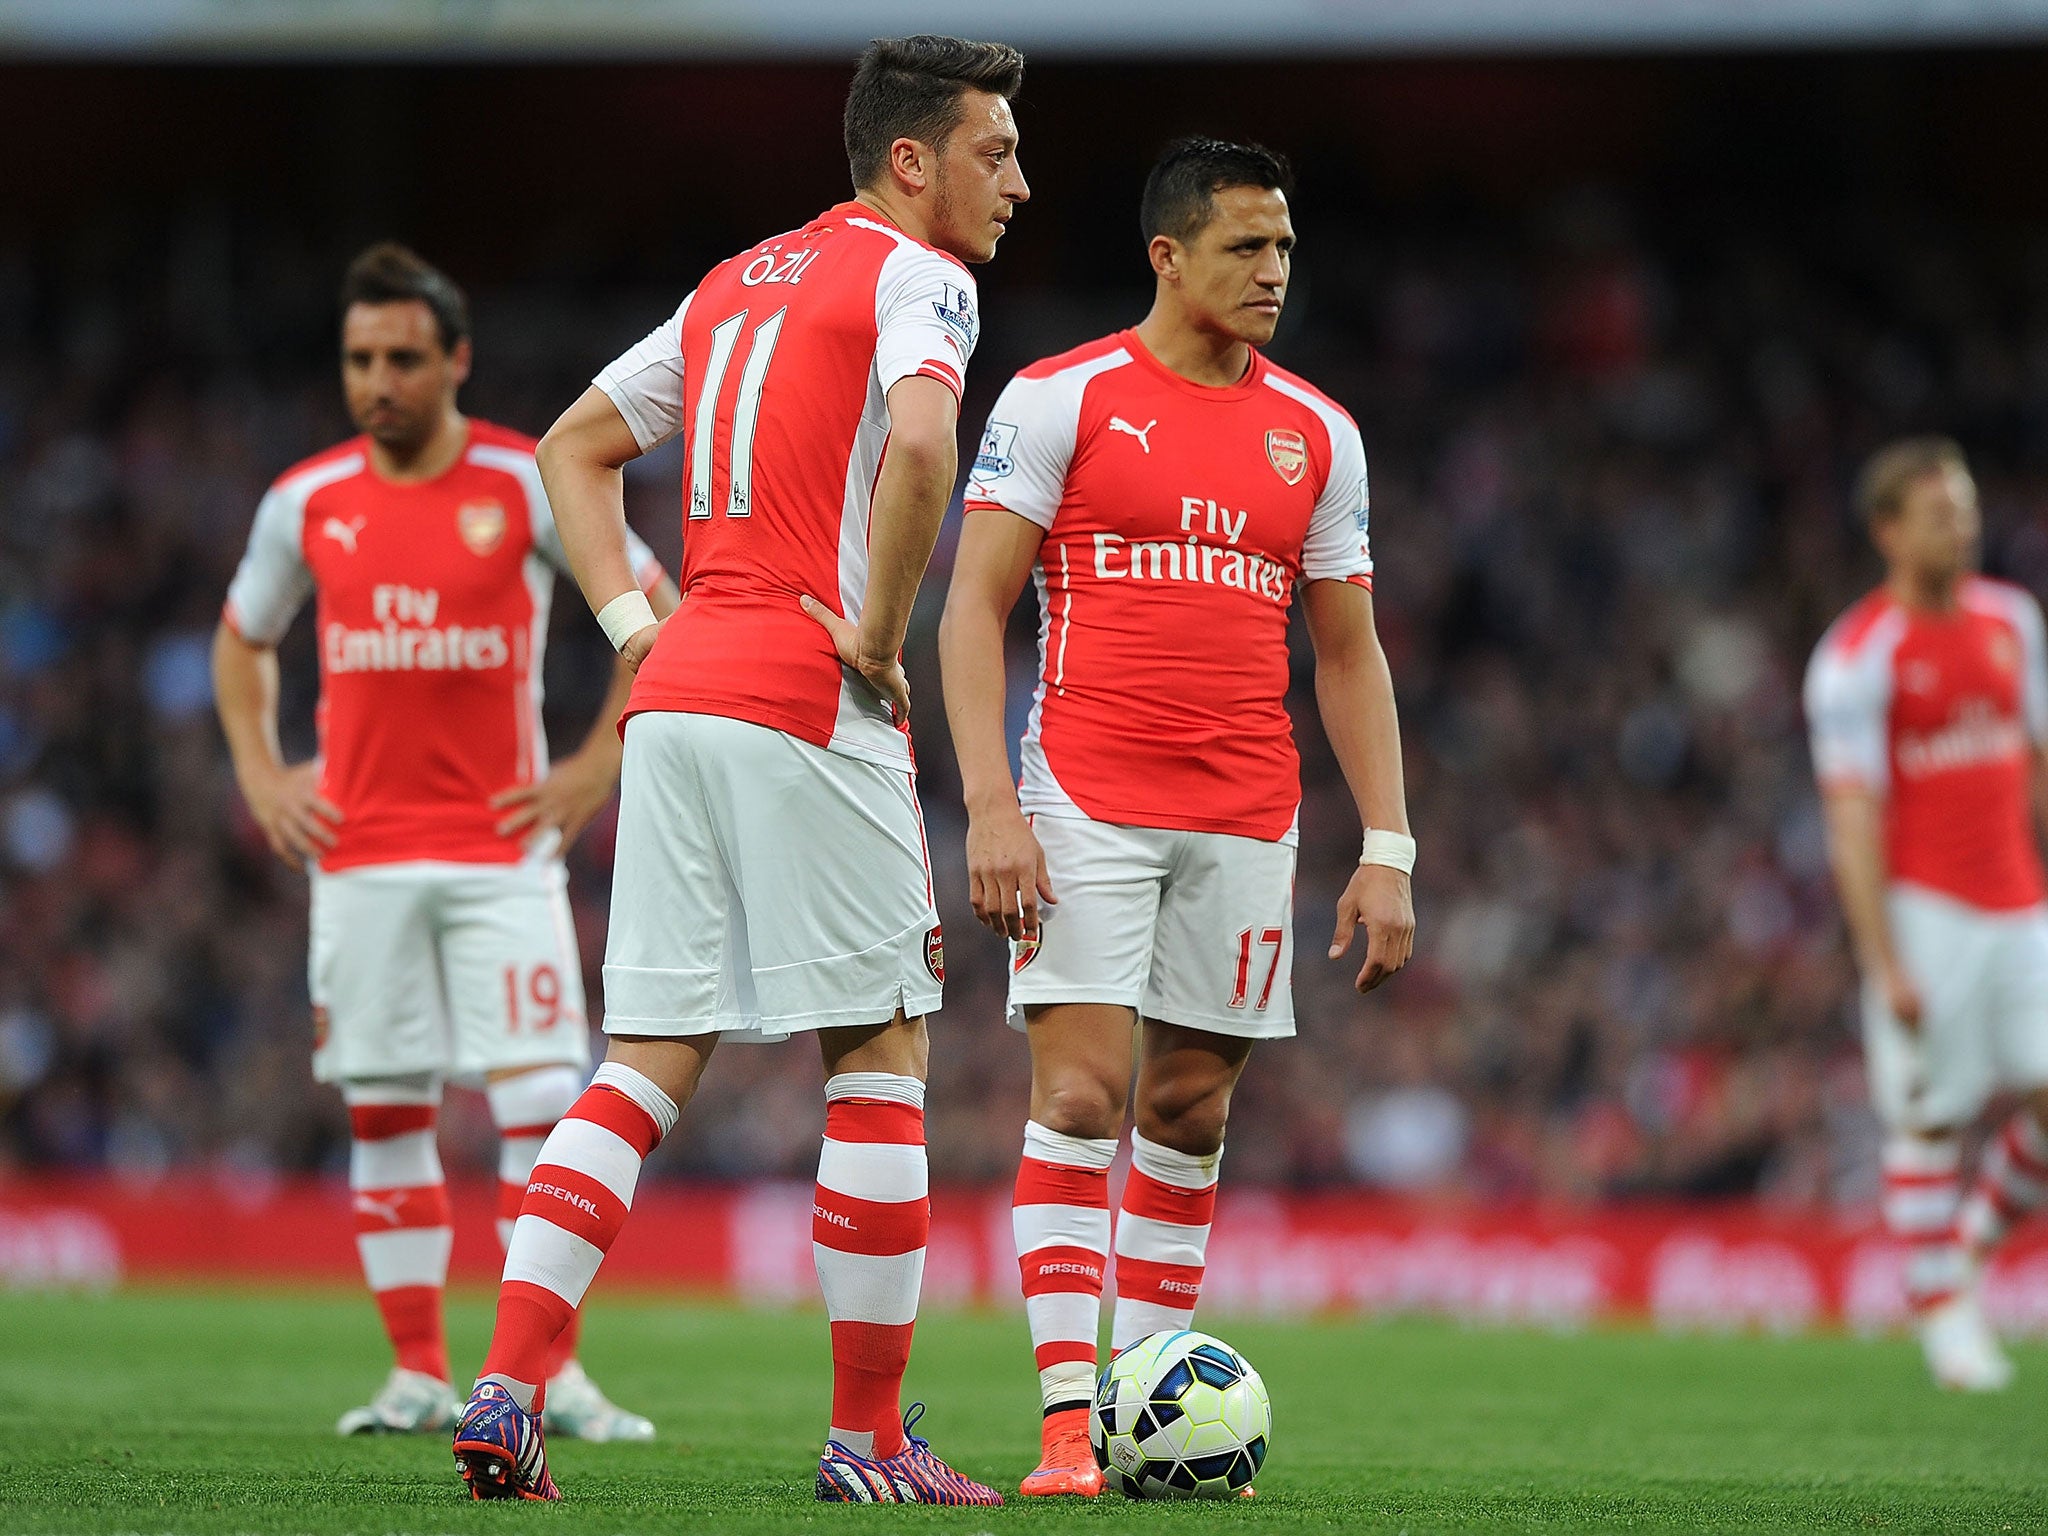 Alexis Sanchez could overtake Mesut Ozil as Arsenal's highest paid player